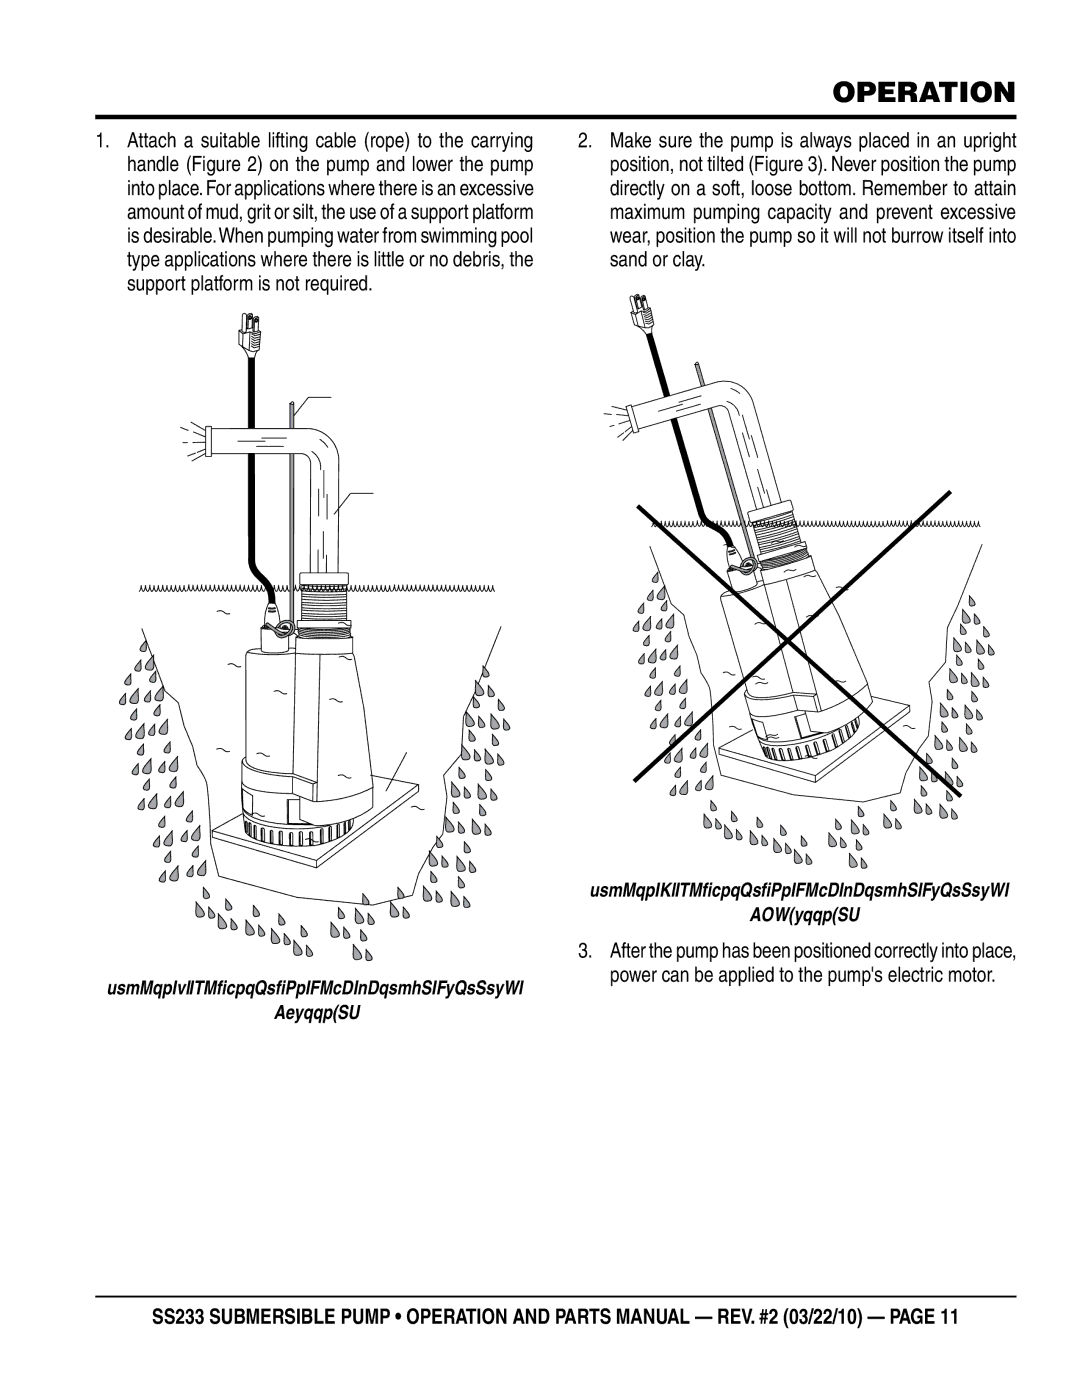 Multiquip SS233 manual Operation, Submersible Pump Upright Position Correct 